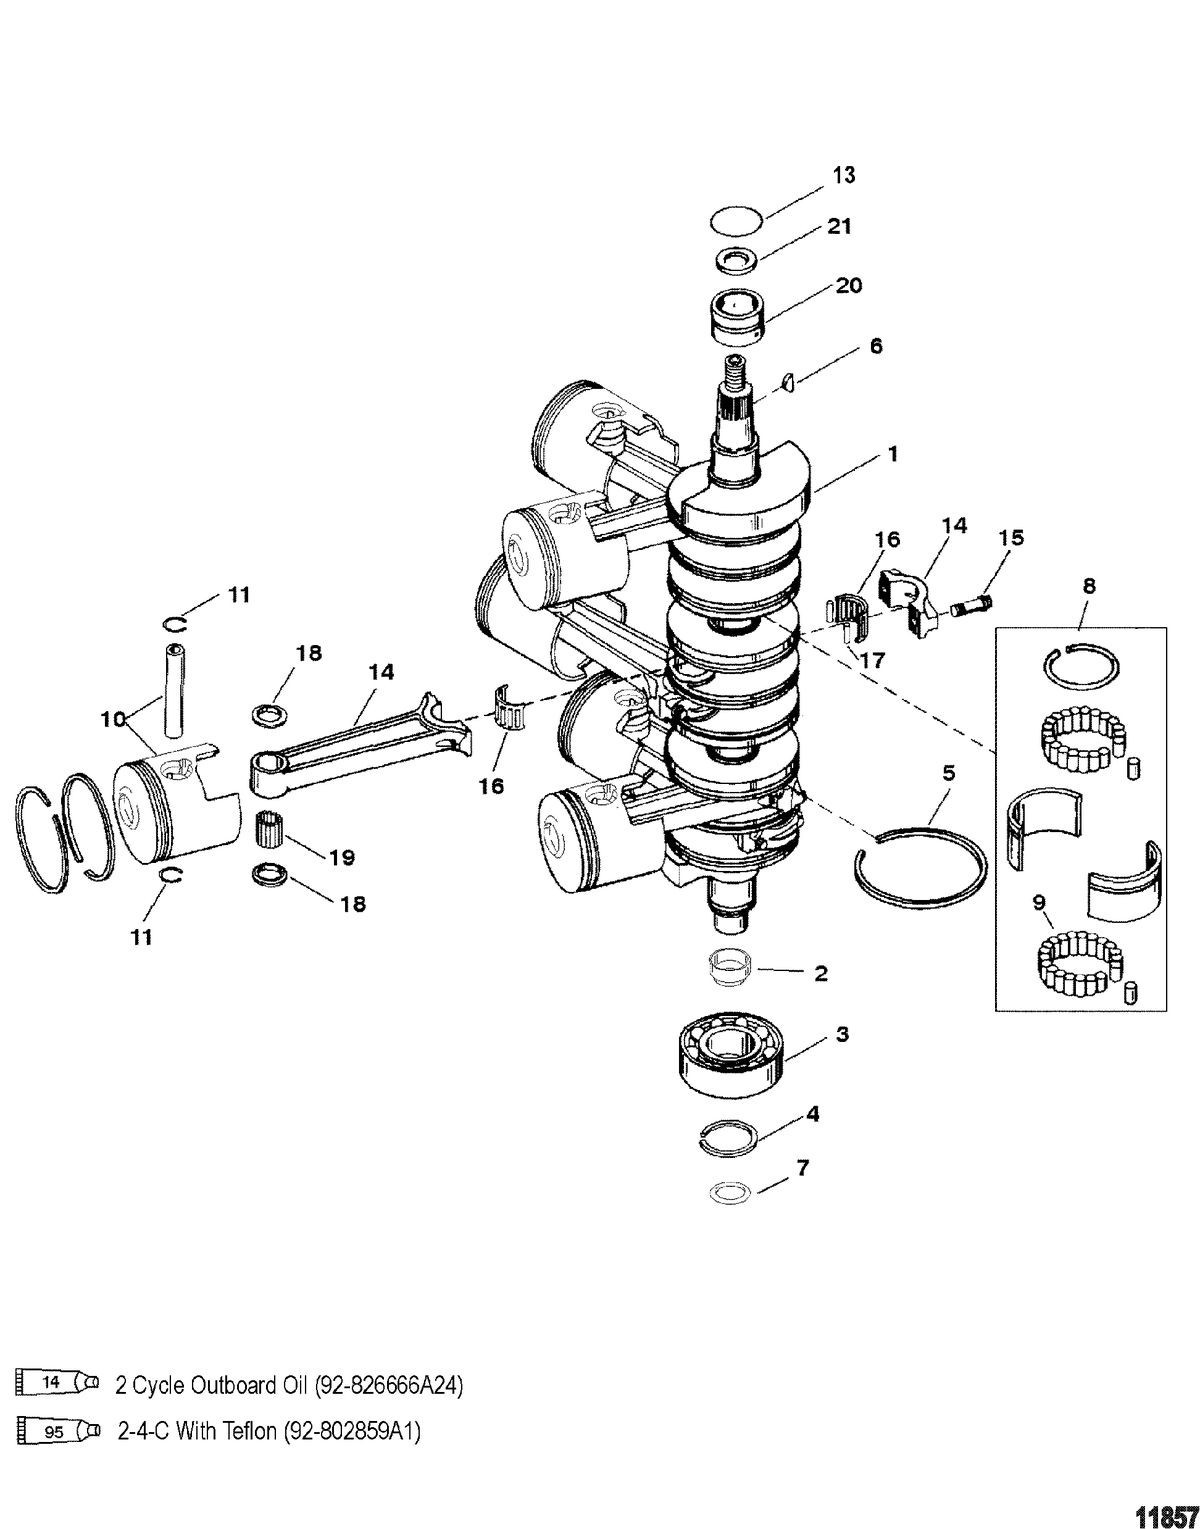 RACE OUTBOARD PARTS MANUAL 300X (3.0L EFI) PRO MAX Crankshaft, Pistons And Connecting Rods